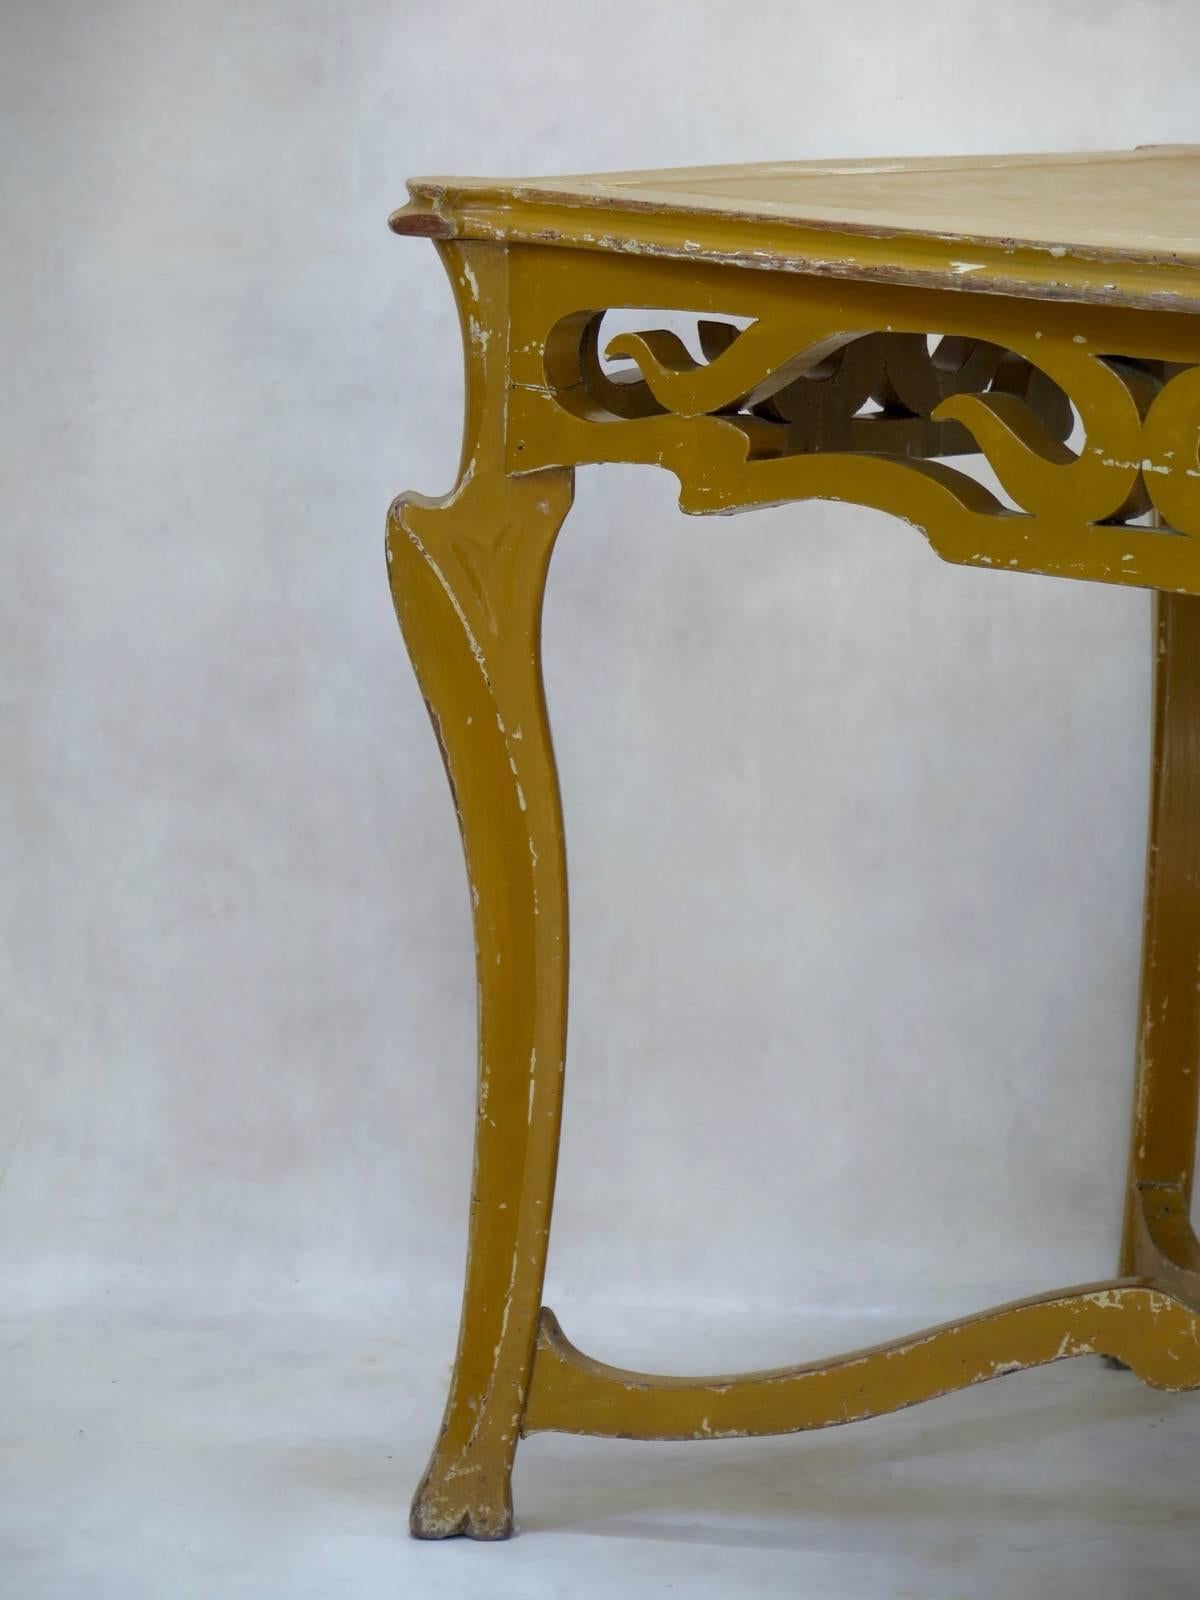 French Art Nouveau table, made of carved wood, with a resin-type top. Original mustard-yellow color. The table has the agreable, flowing lines characteristic of the style, but also a nice chunkiness, which makes it so particular. Very Hector Guimard.